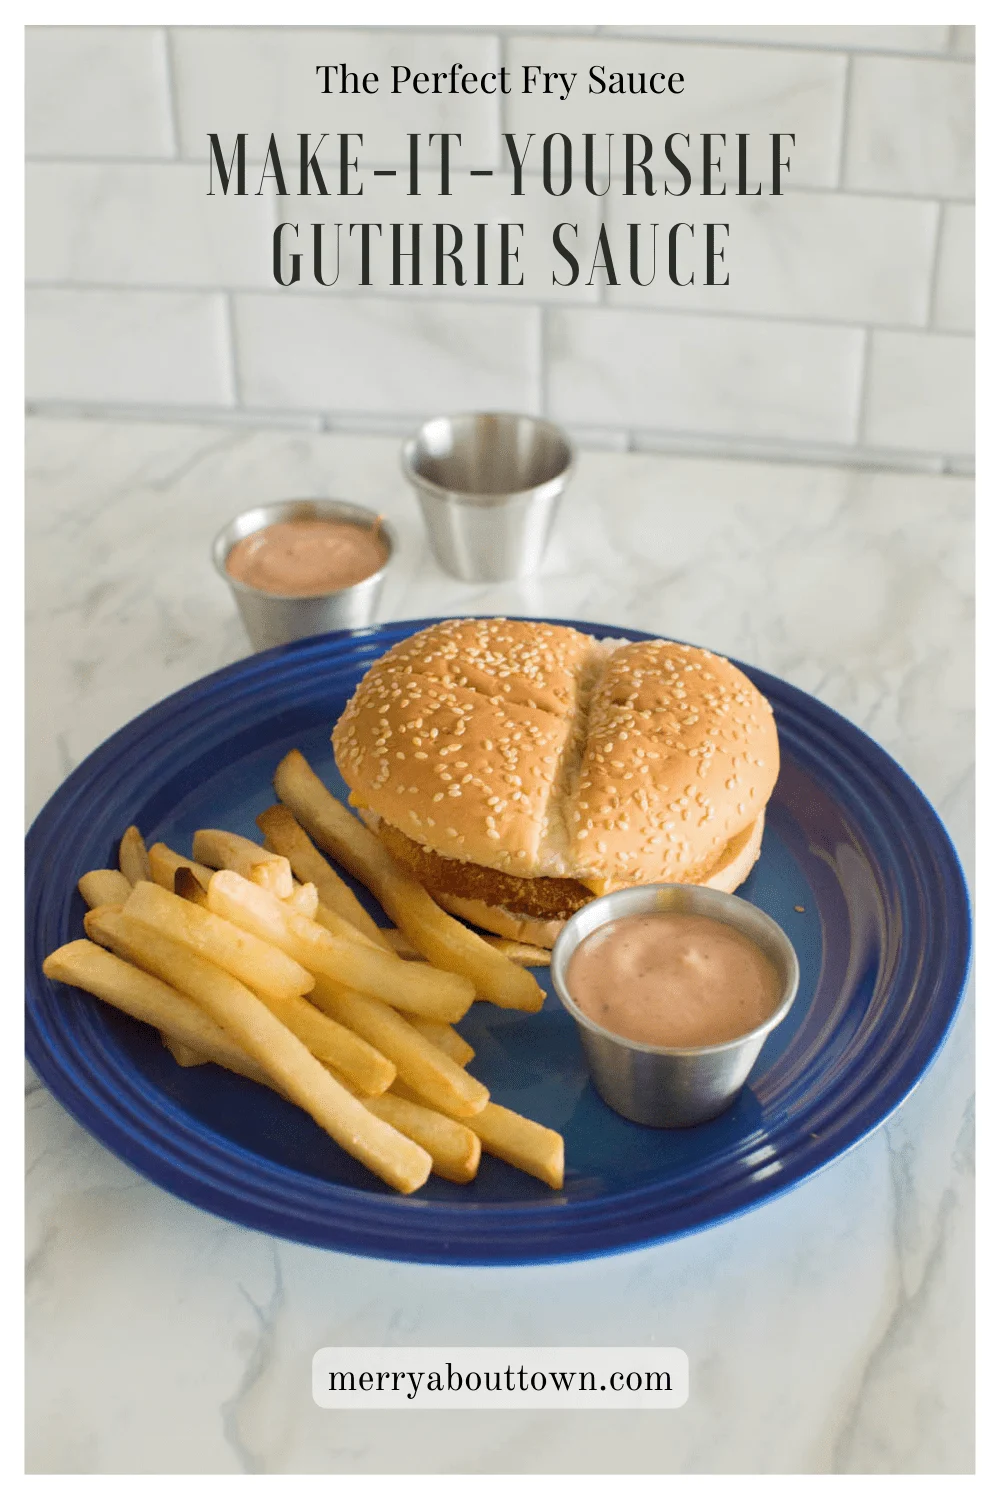 Guthrie’s Sauce is a delicious condiment for fries, chicken fingers… and just about everything else! Take a look at my Copycat Guthrie’s Sauce that’s incredibly easy to whip-up!